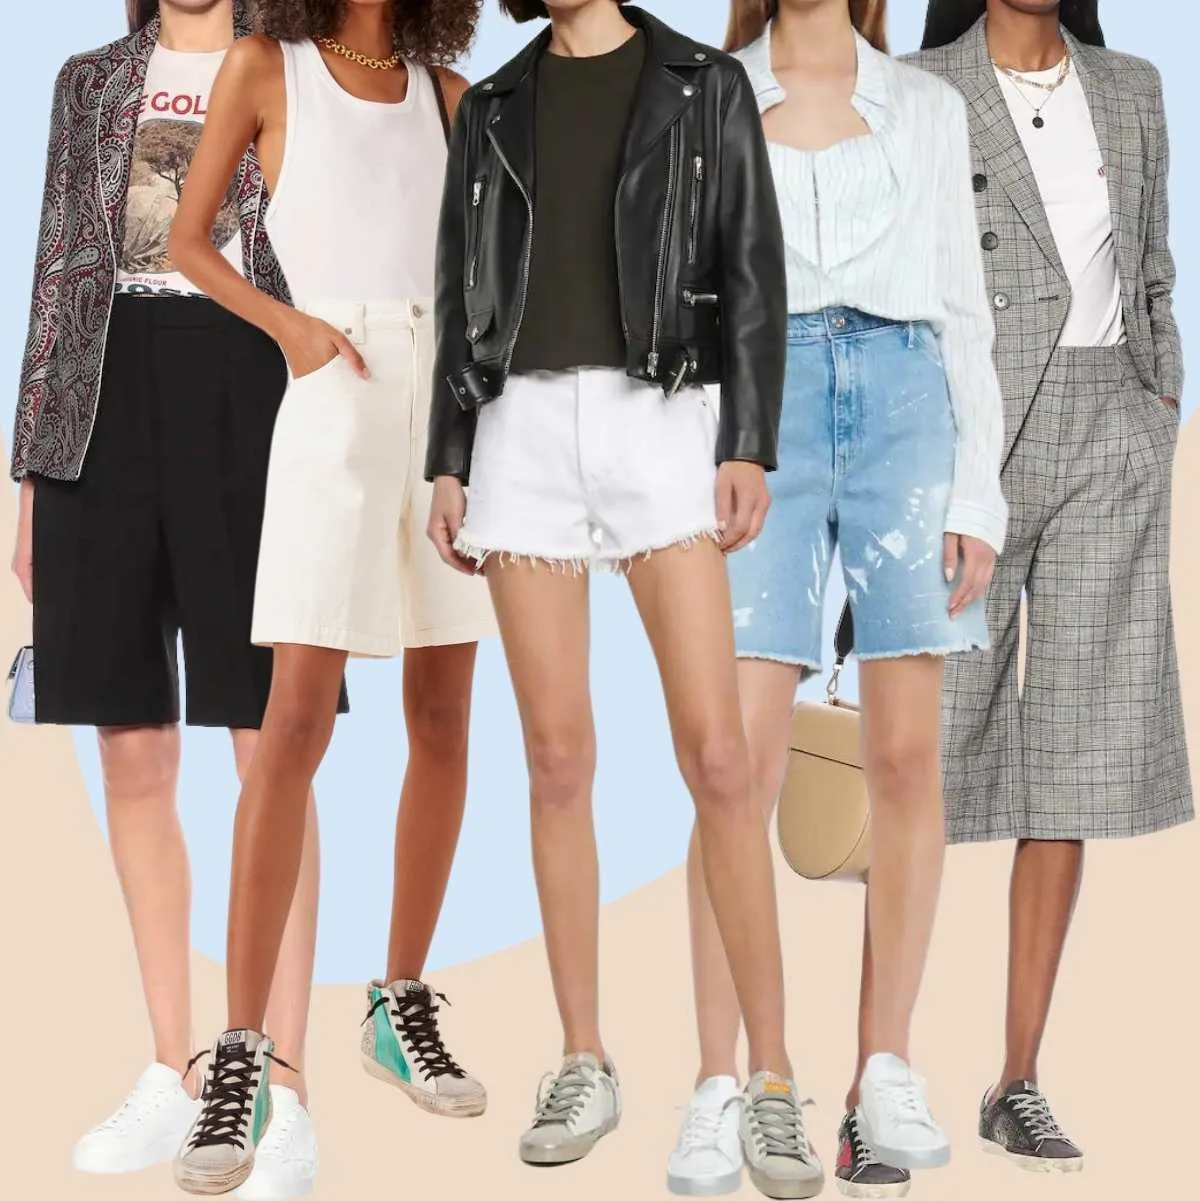 Collage of 5 women wearing different golden goose outfits with shorts.